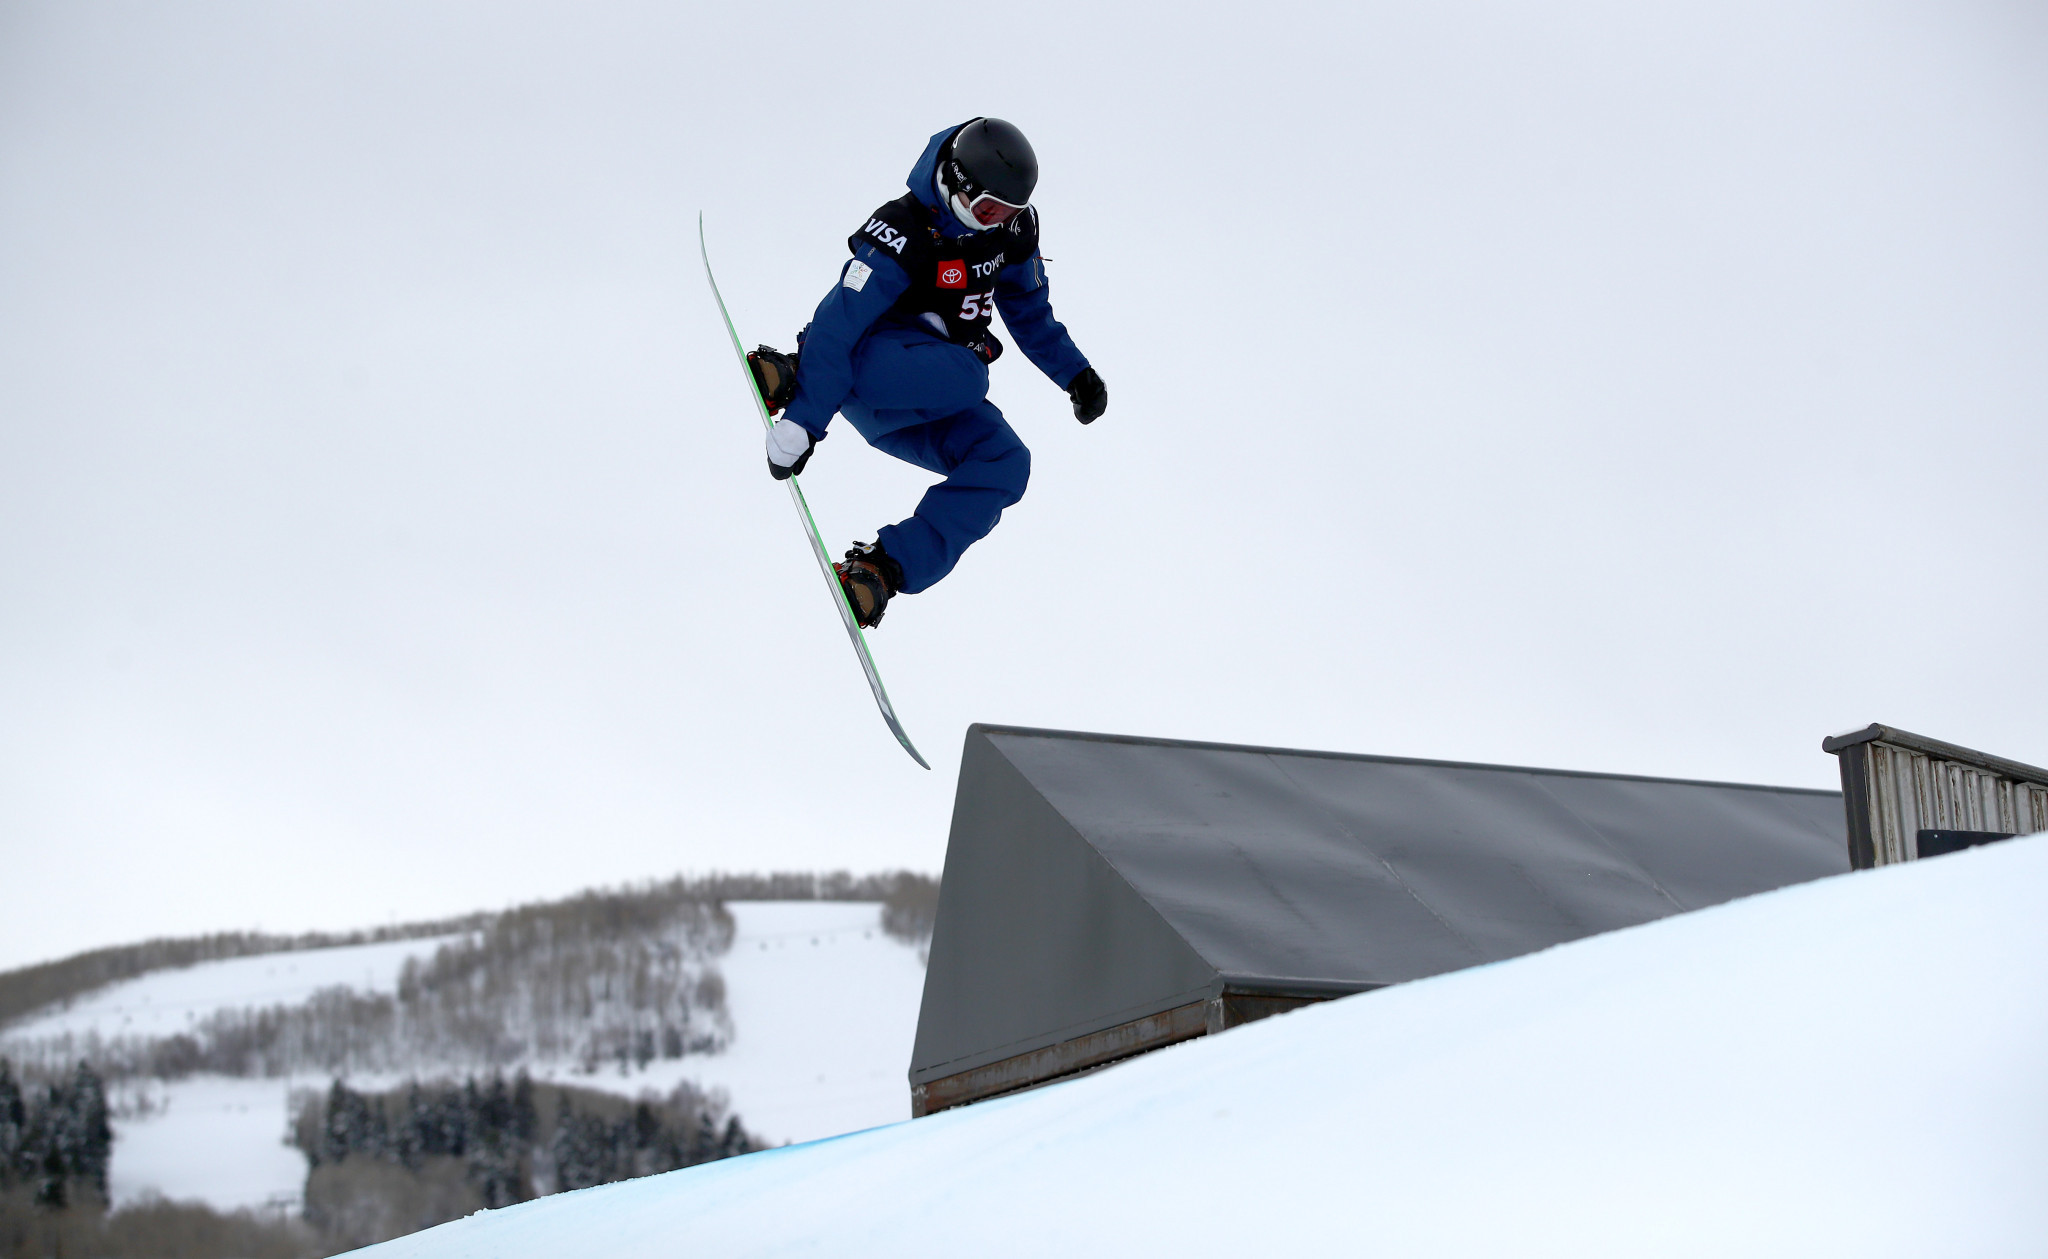 Snowboard slopestyle is one of the disciplines set to take place in Aspen ©Getty Images